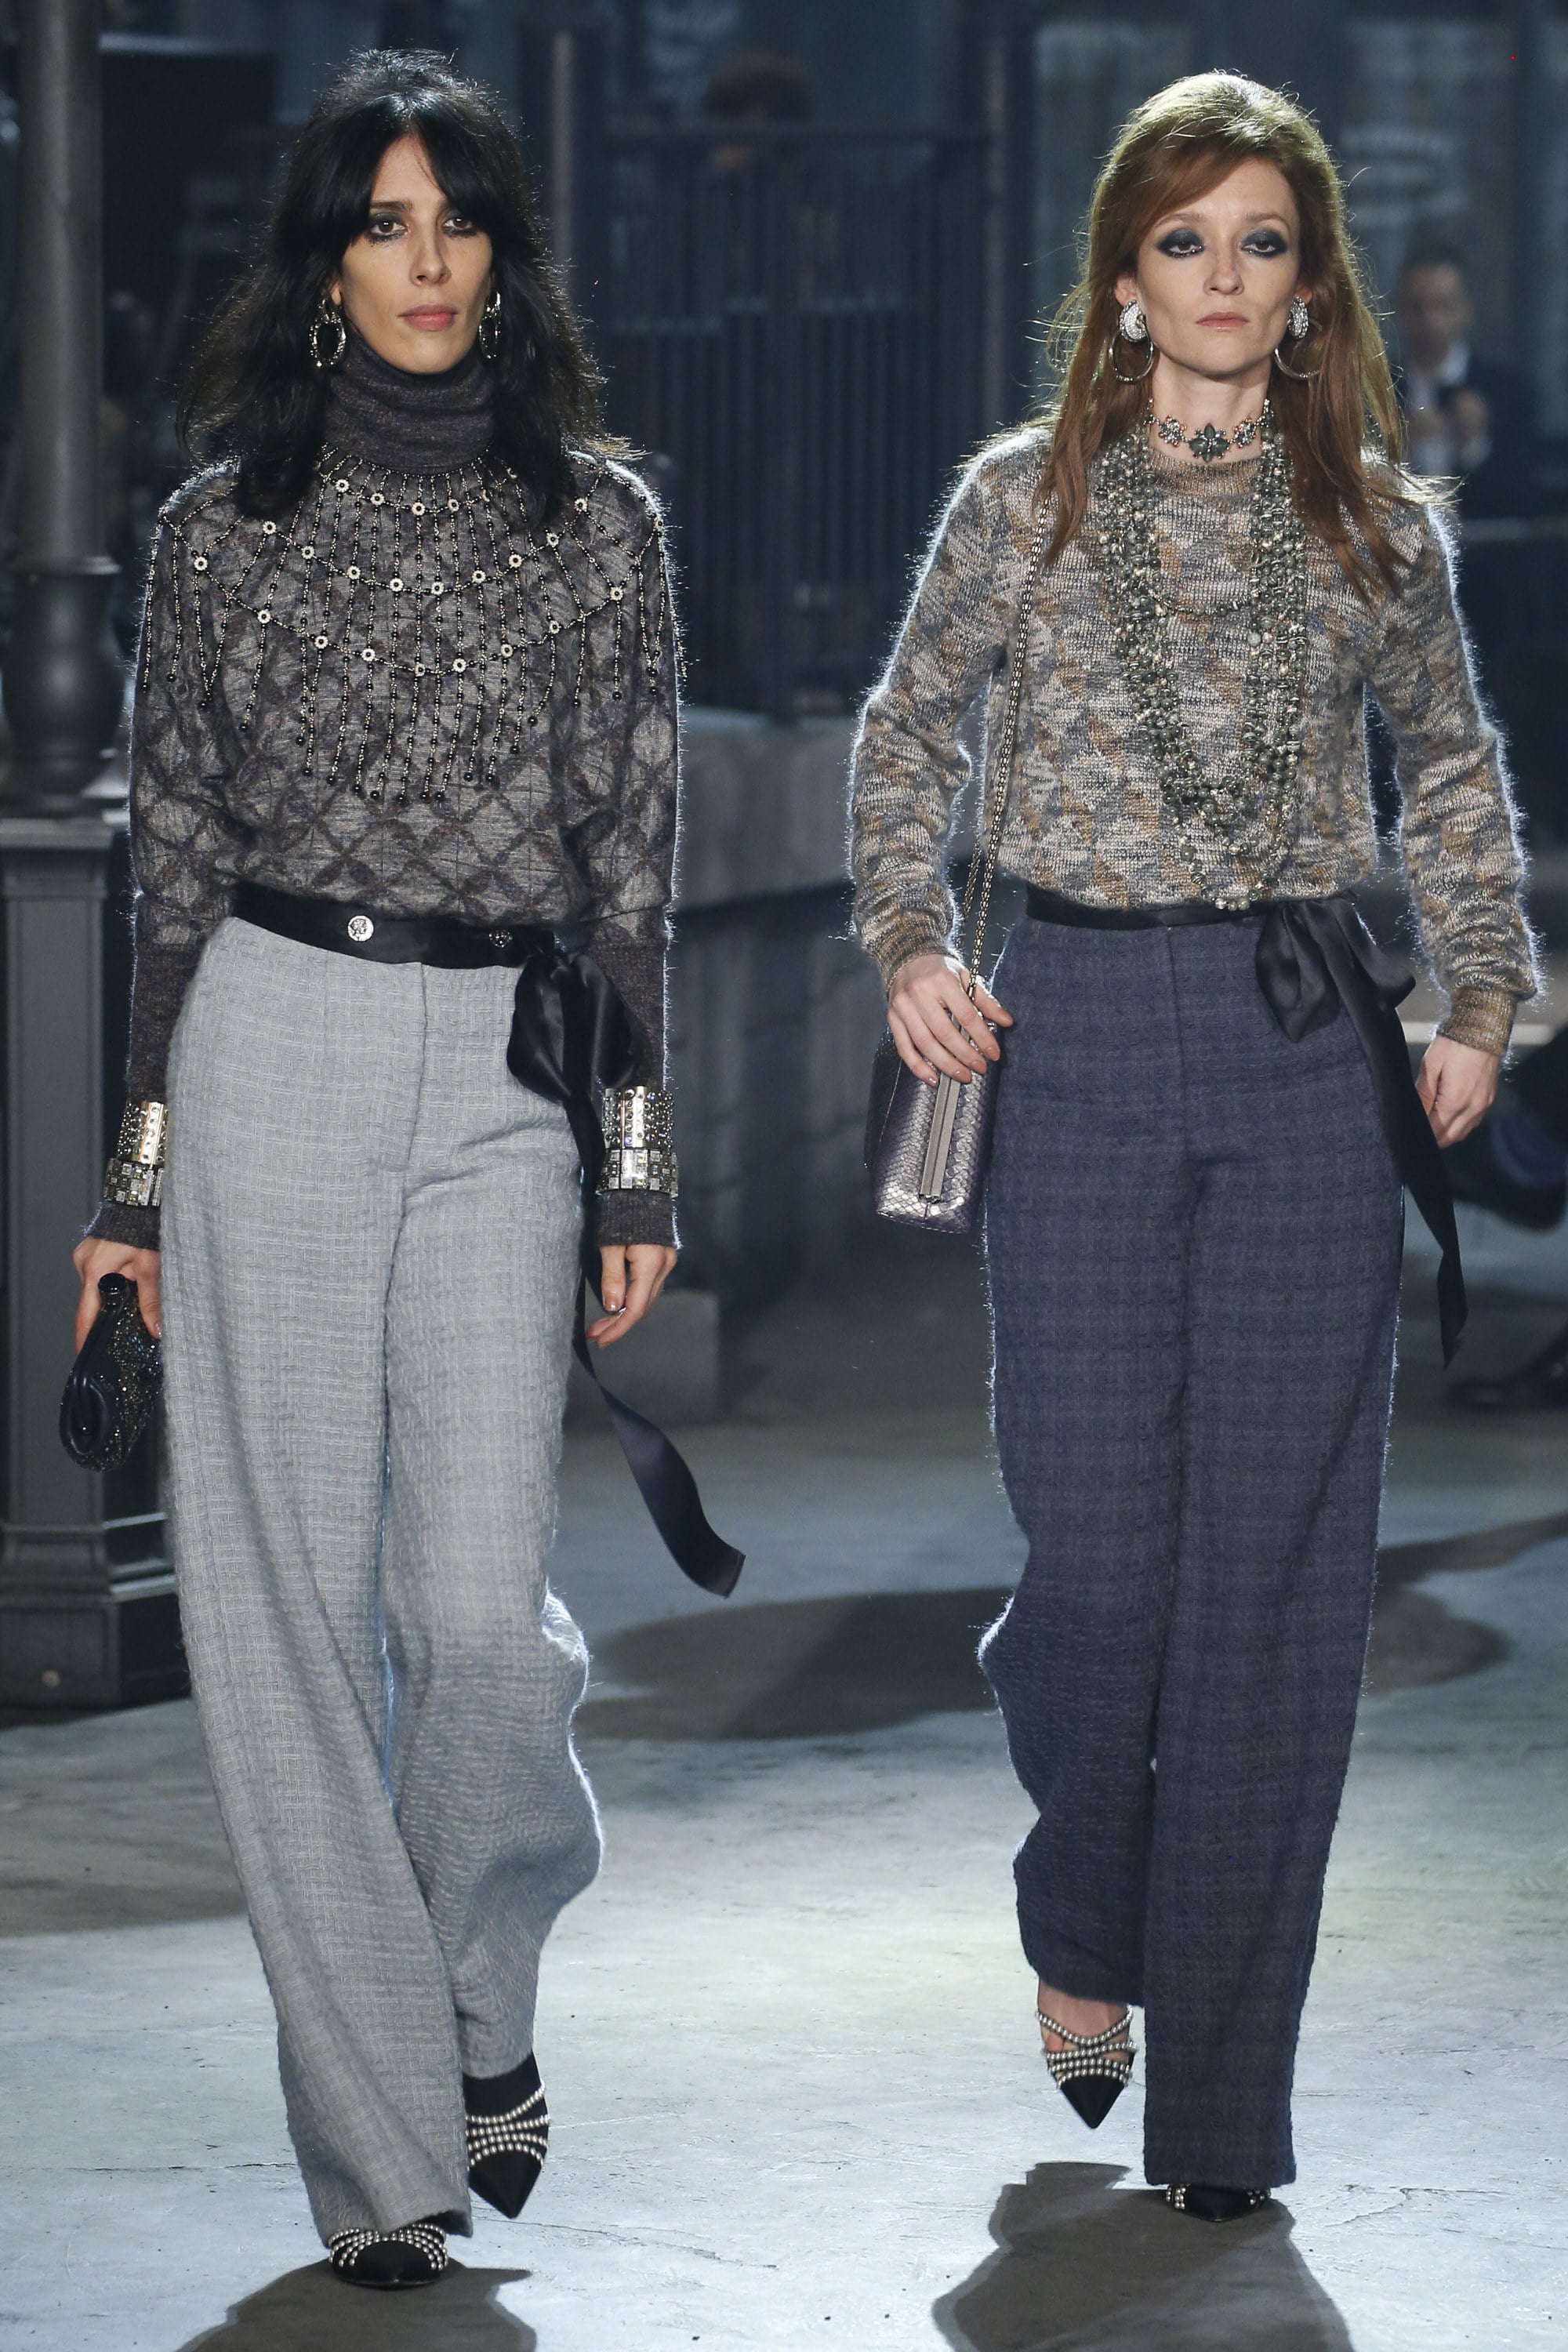 Chanel Paris in Rome Métiers d'Art Pre-Fall 2016 Runway Collection